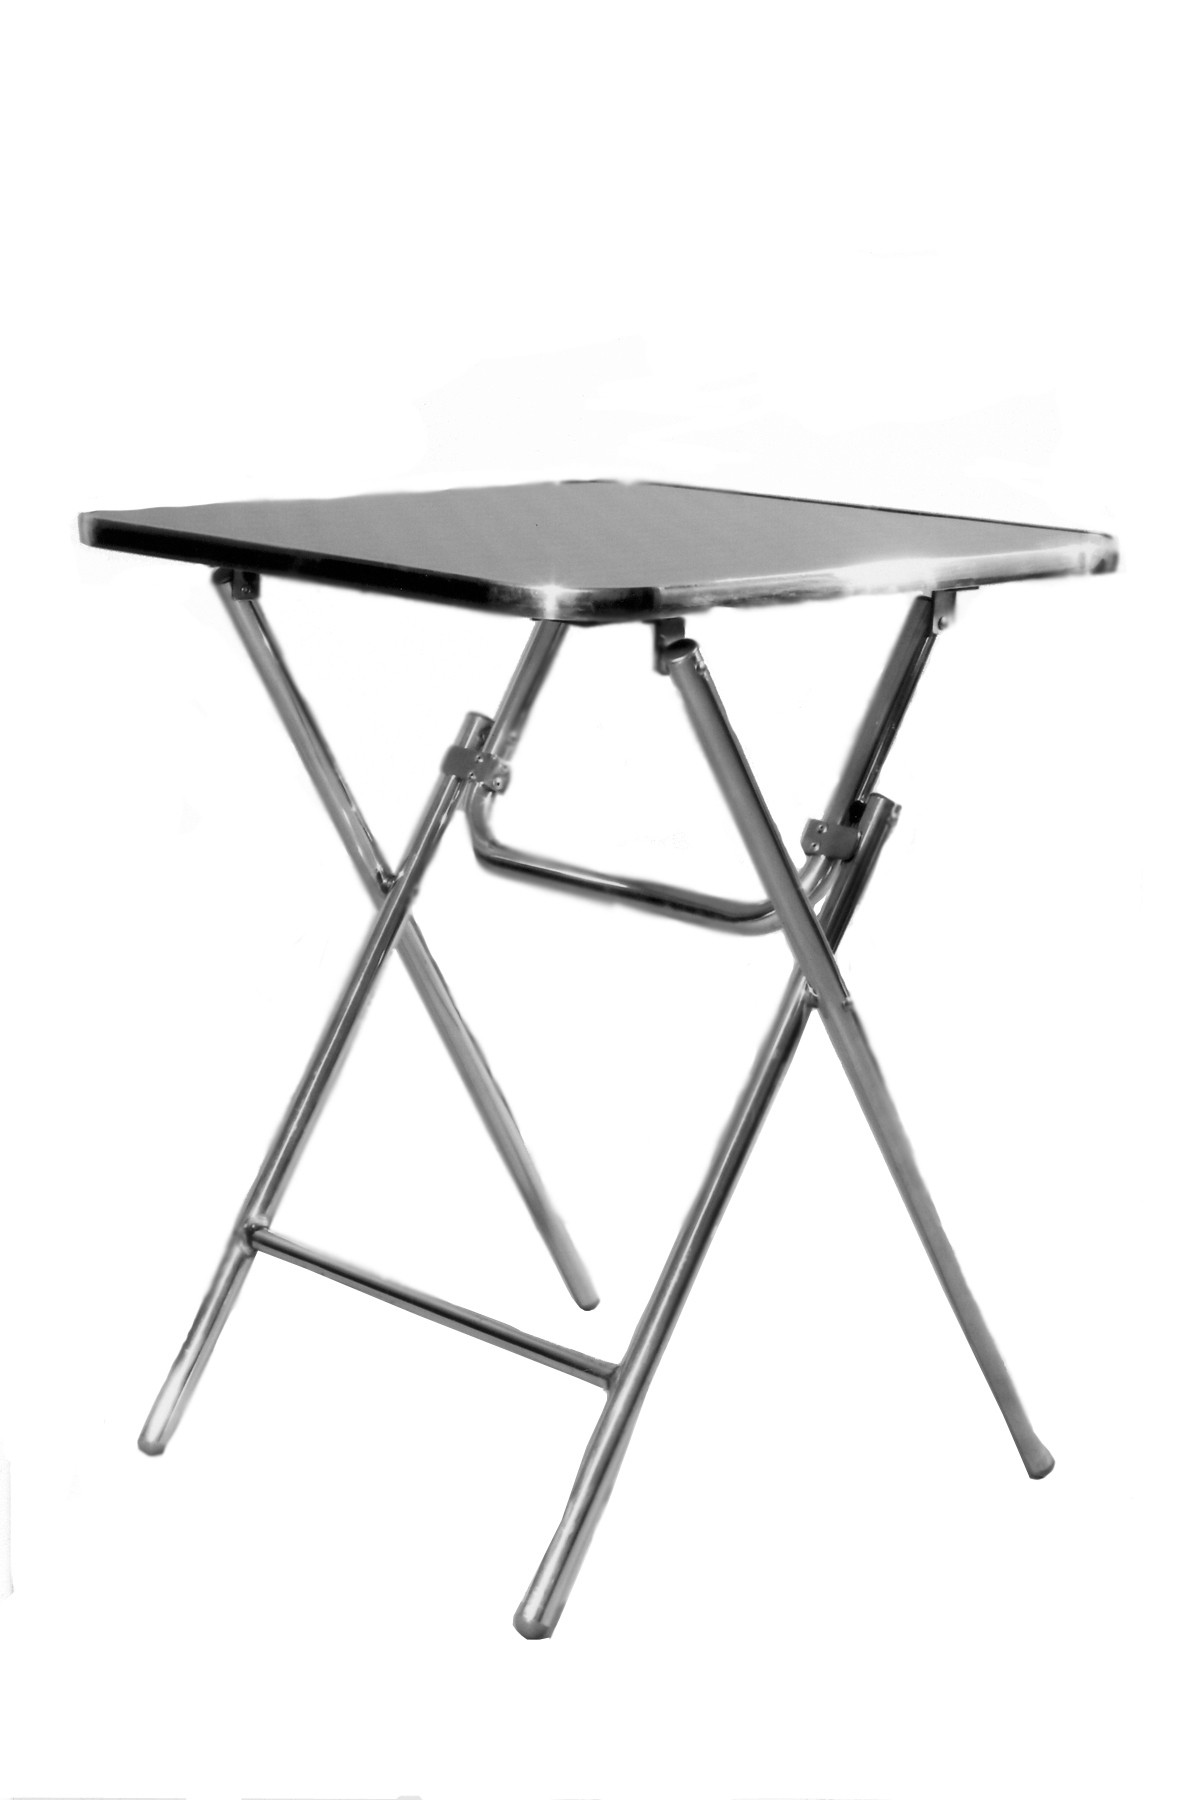 Aluminium folding table with top of stainless steel